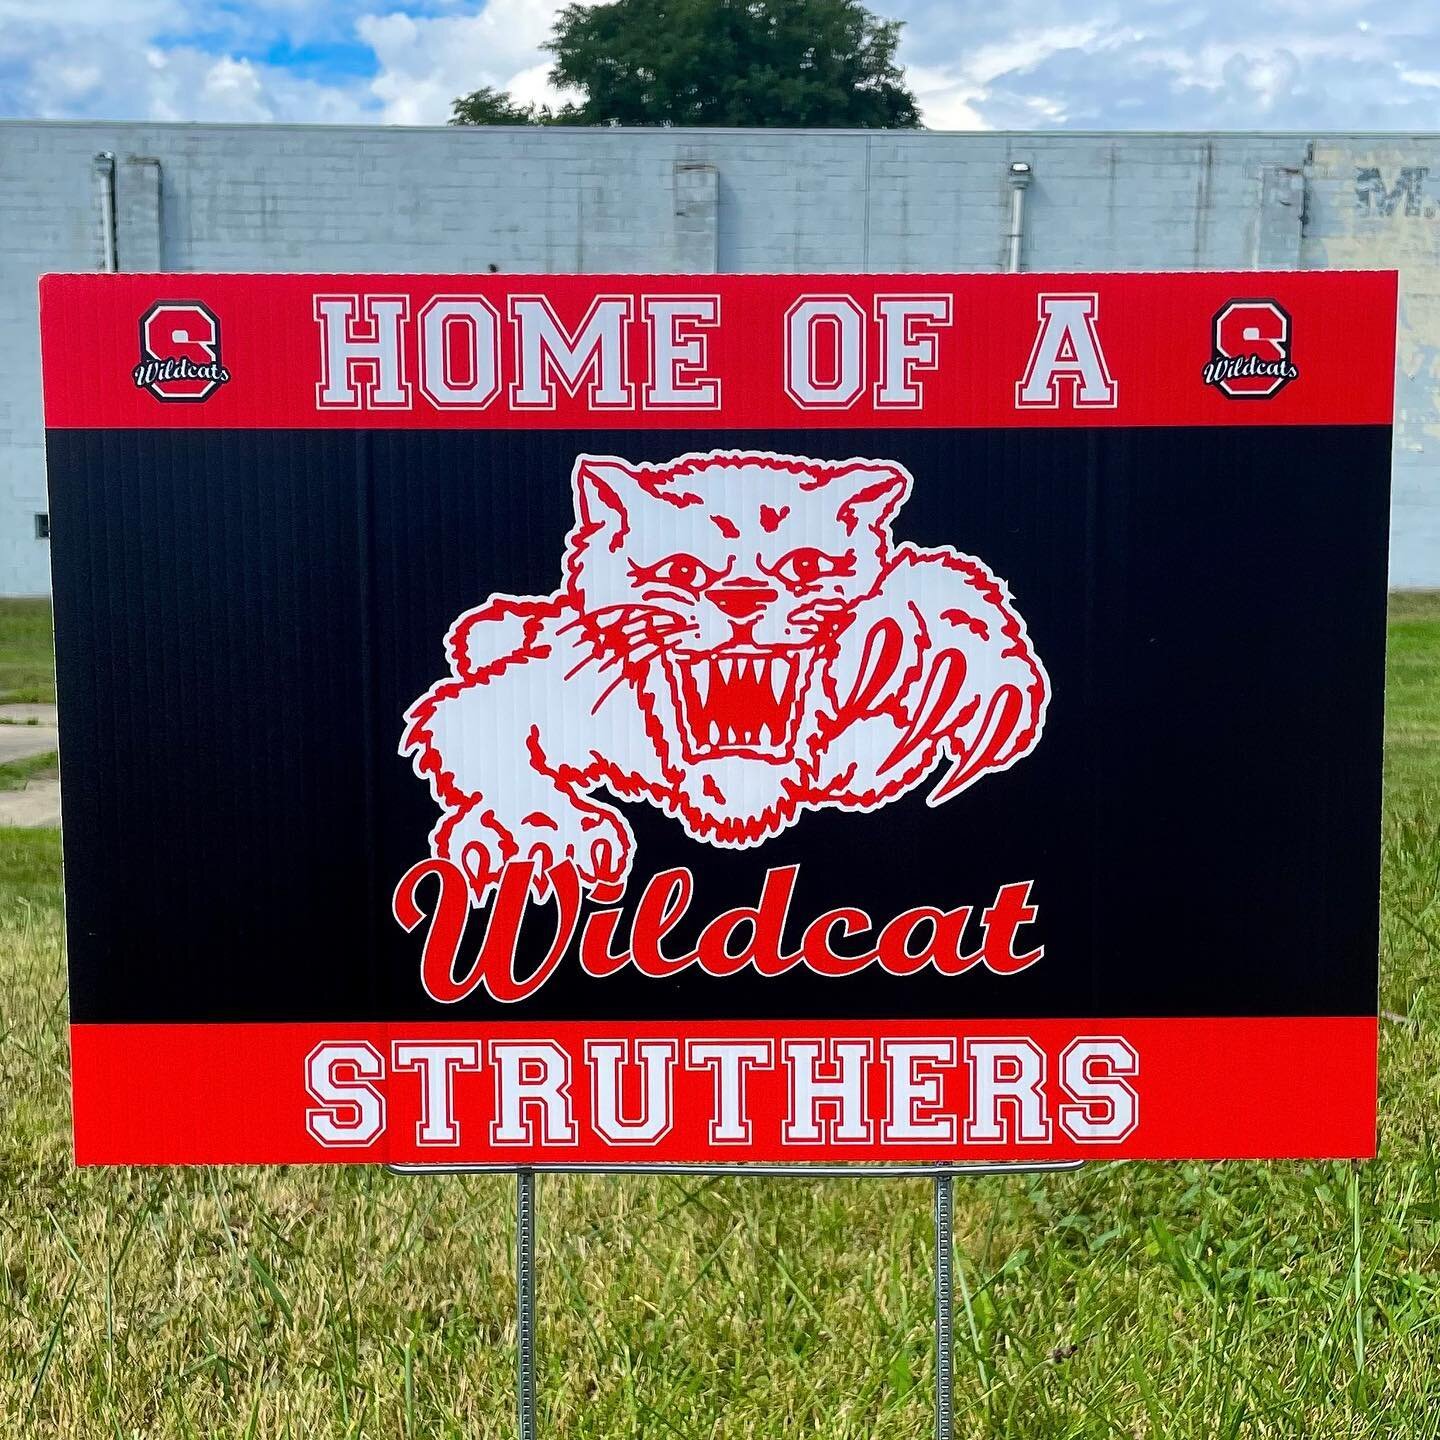 School spirit yard signs for Struthers City Schools! #gowildcats 🐾